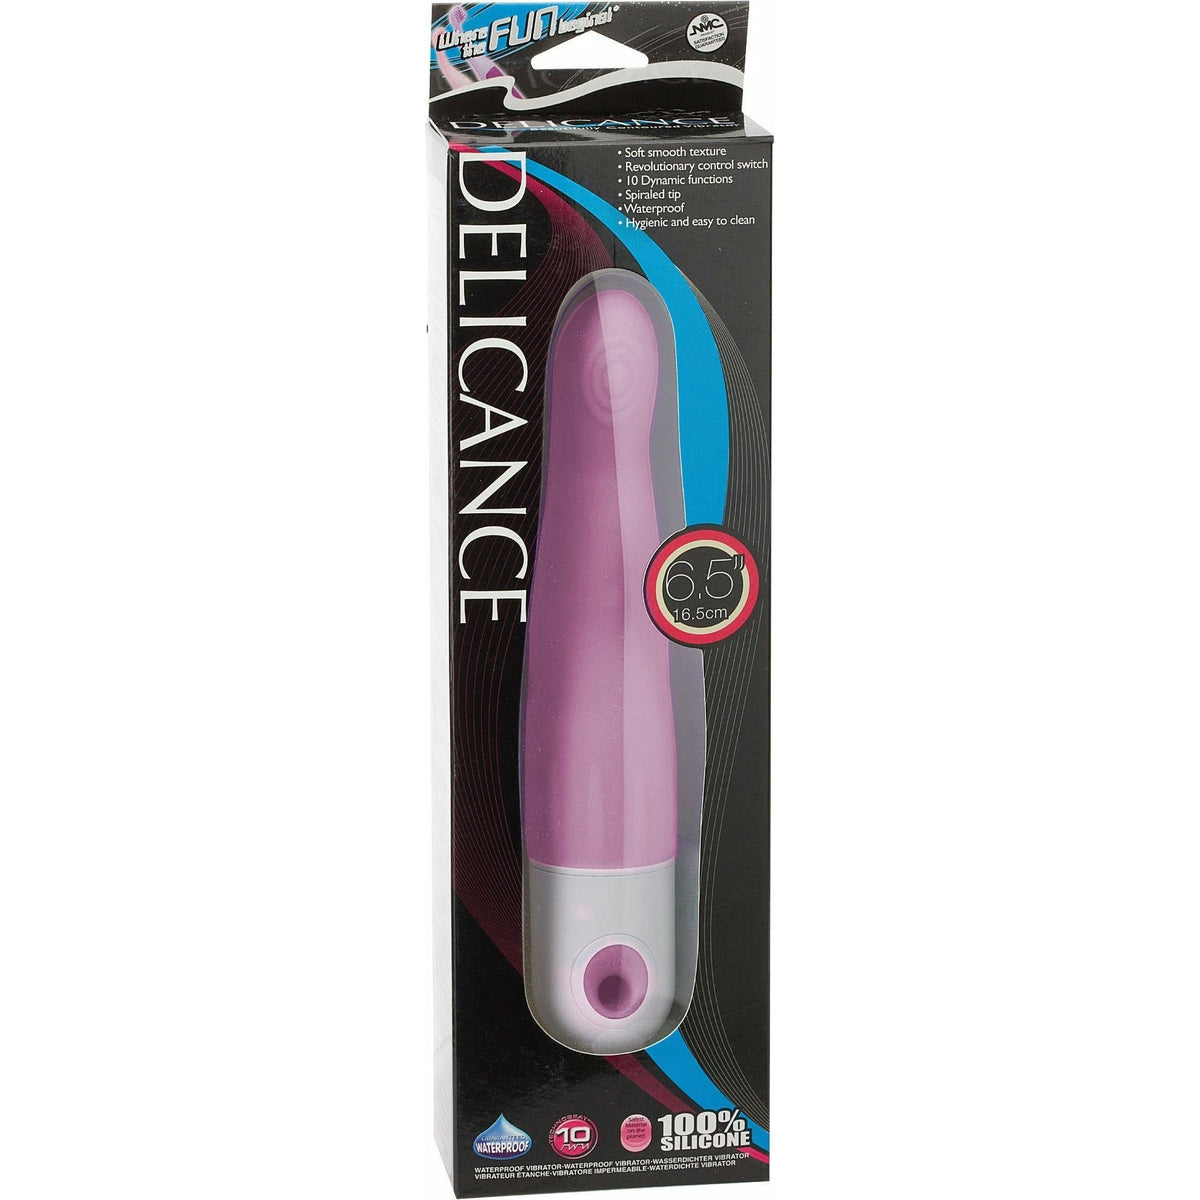 10 Function Delicance Silicone Vibrator - 6.5&quot; - Pink